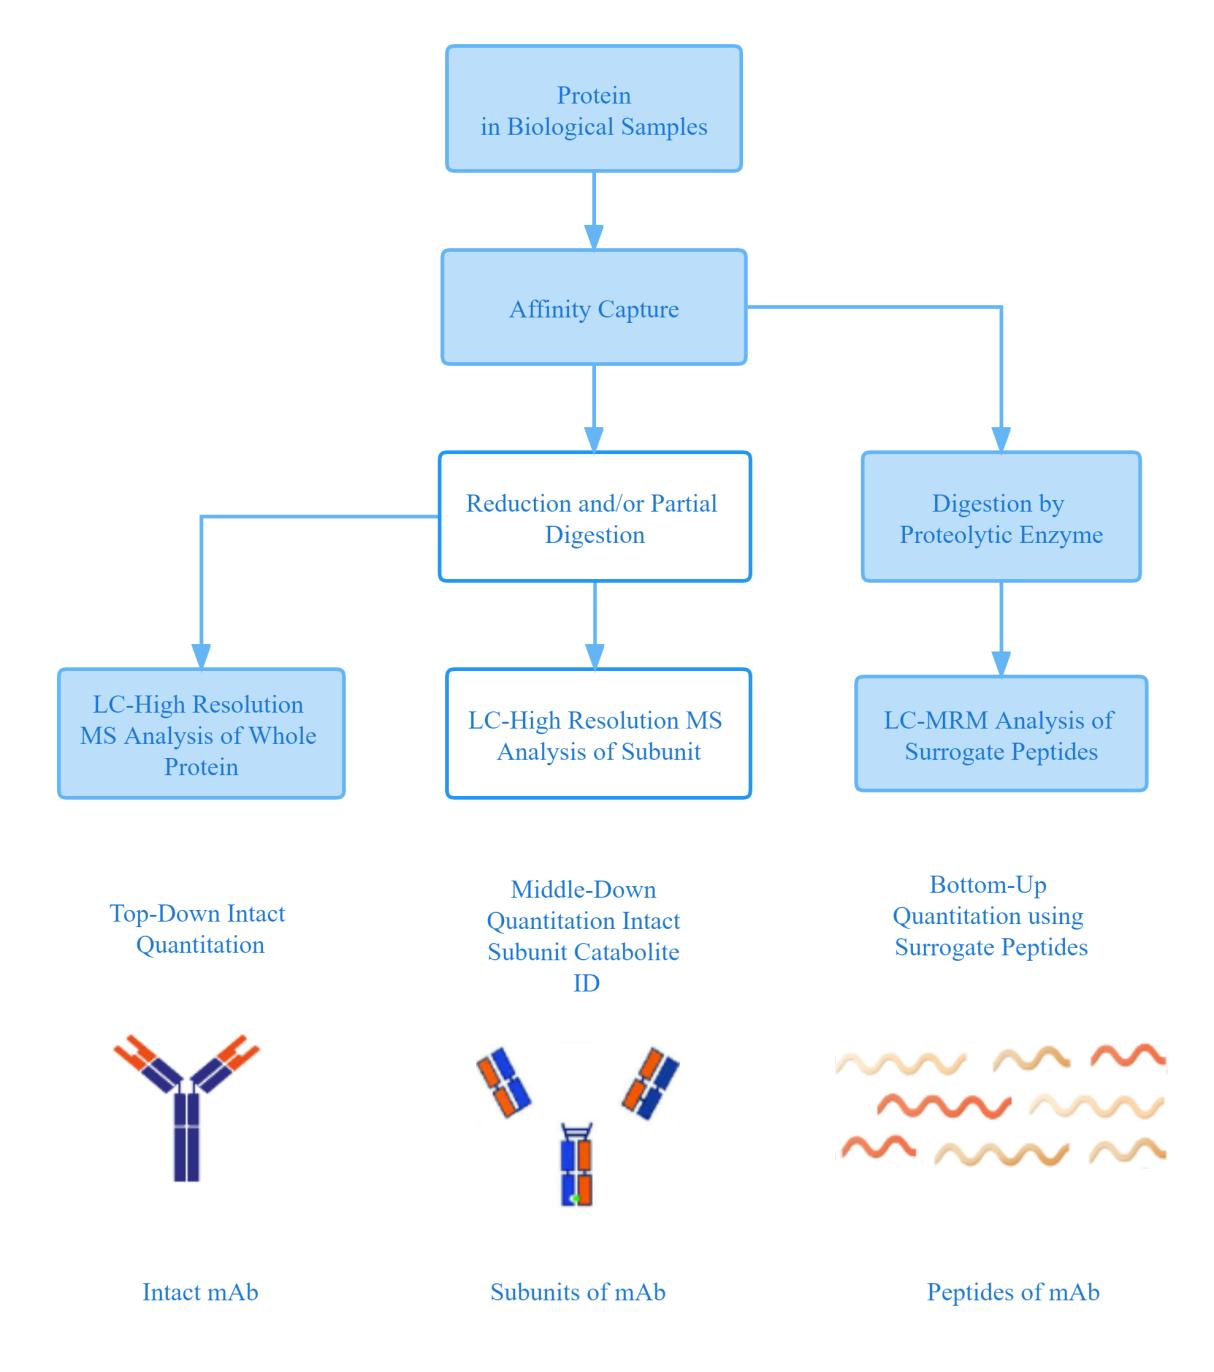 Mass spectrometry-based protein characterization techniques